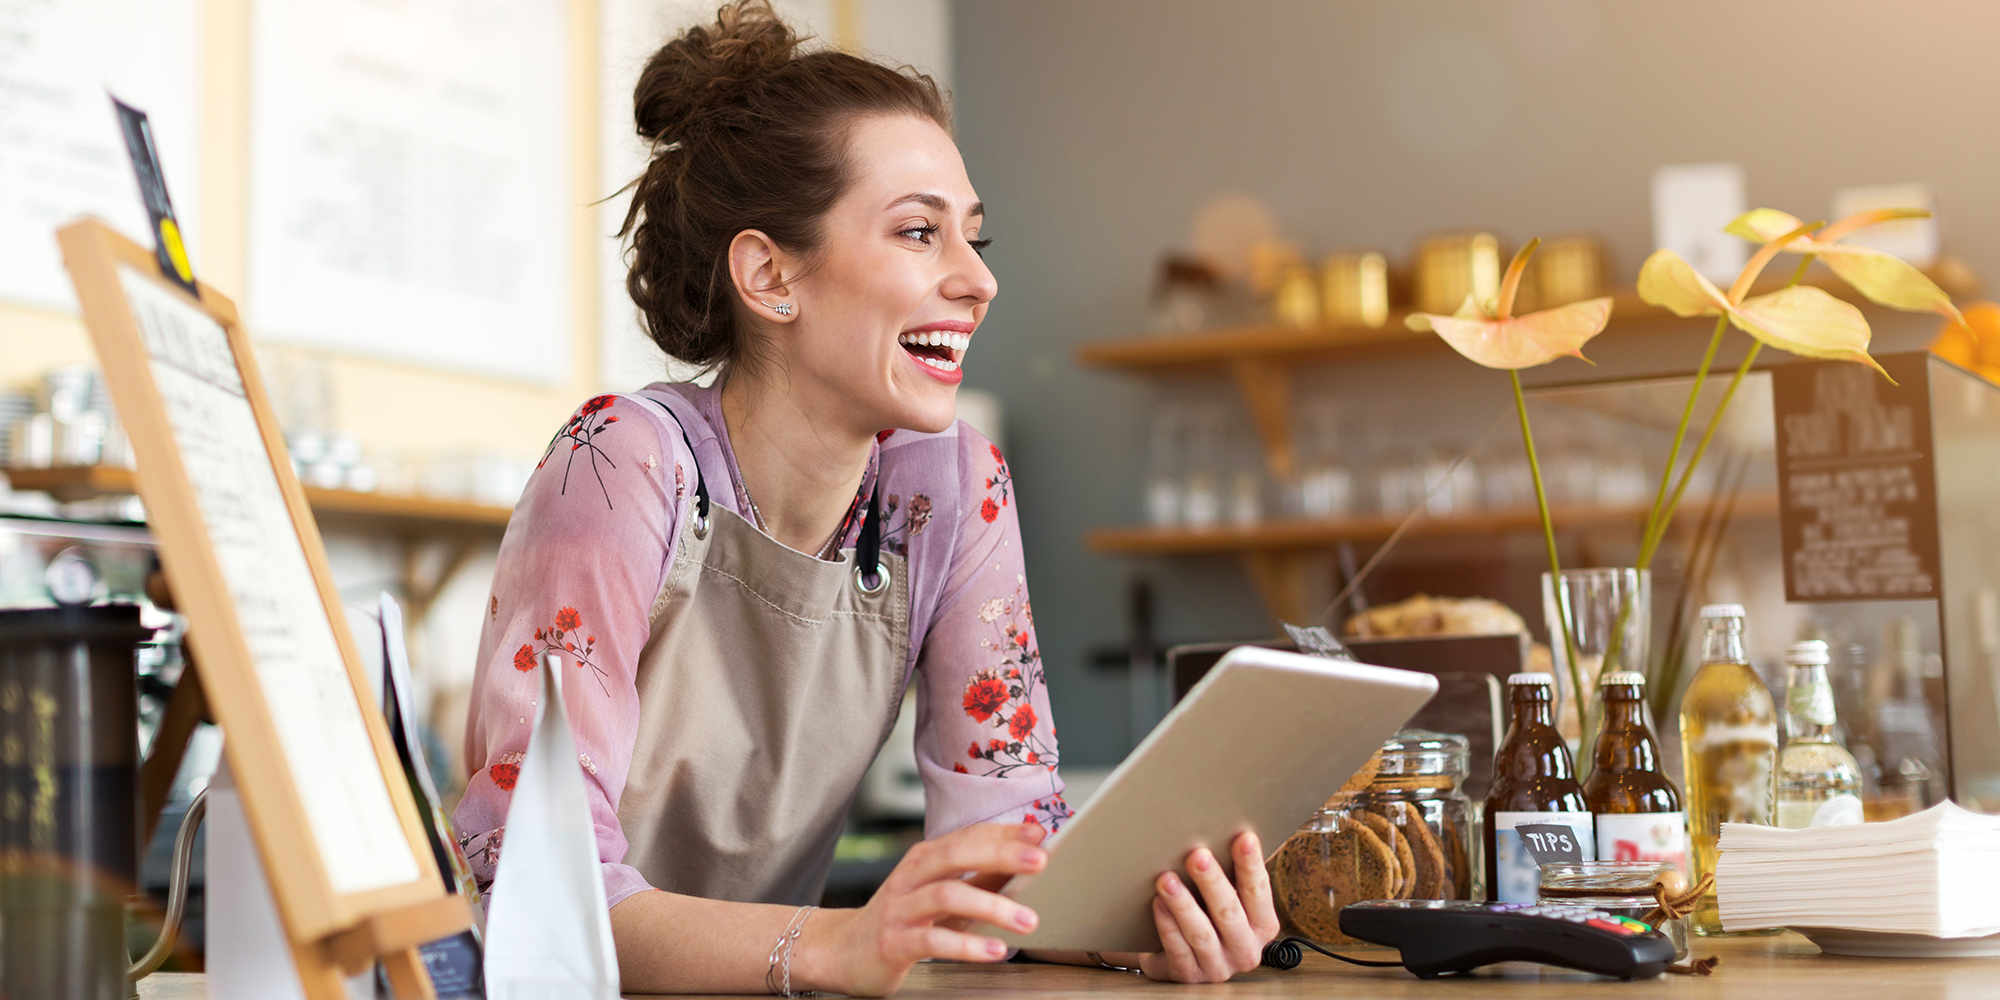 woman smiling in a shop holding a tablet device | Digital business skills